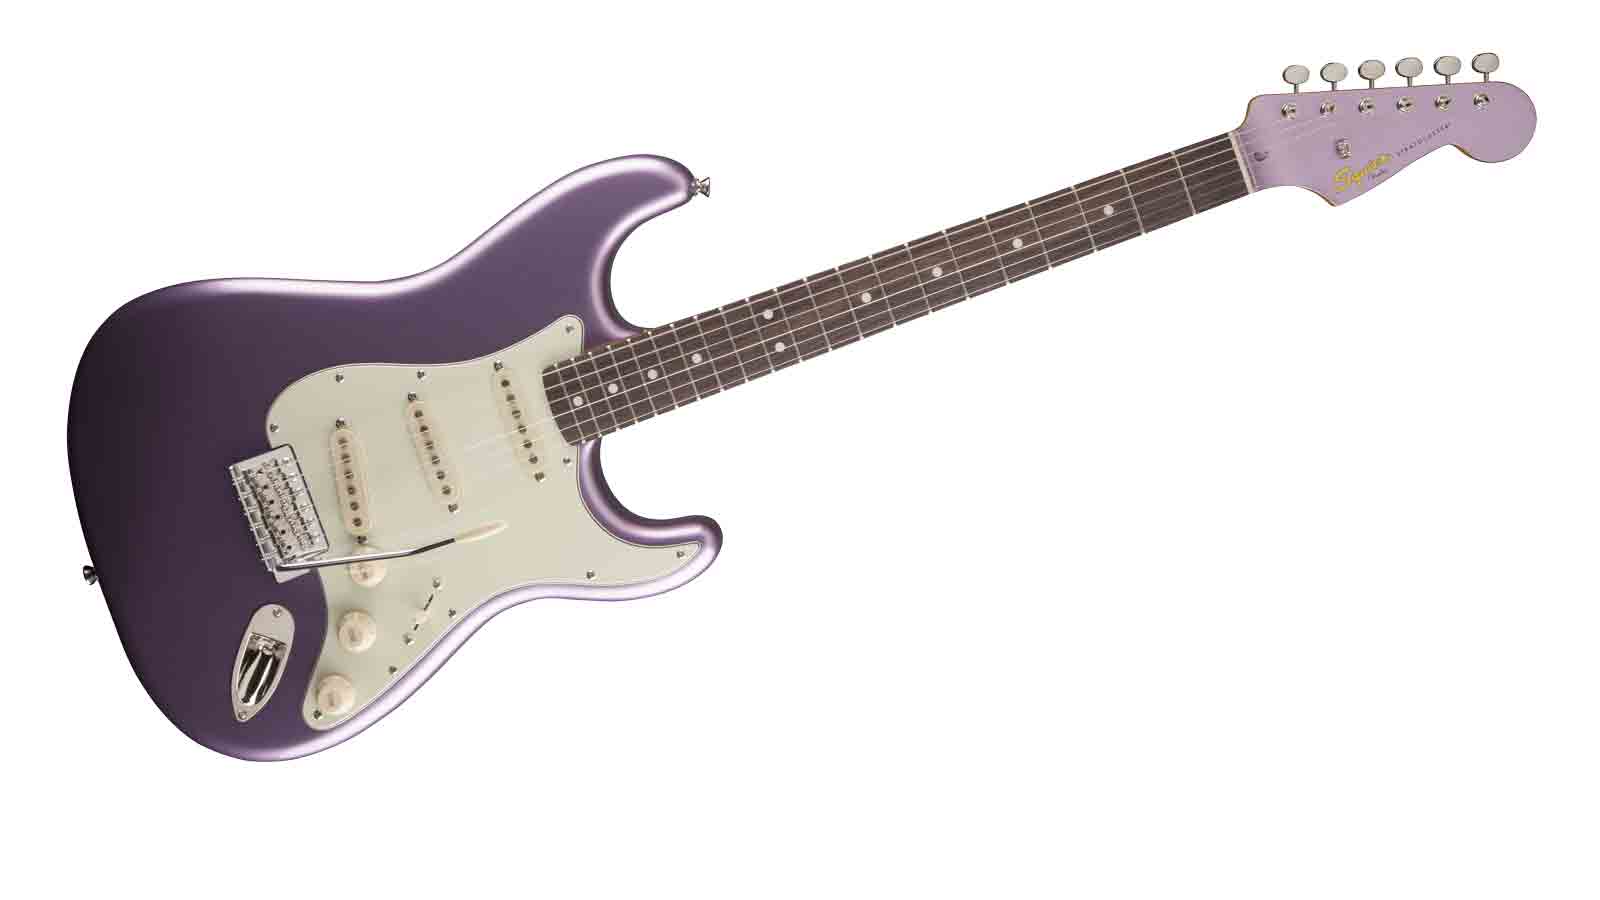 Squier Classic Vibe Stratocaster '60s review | MusicRadar